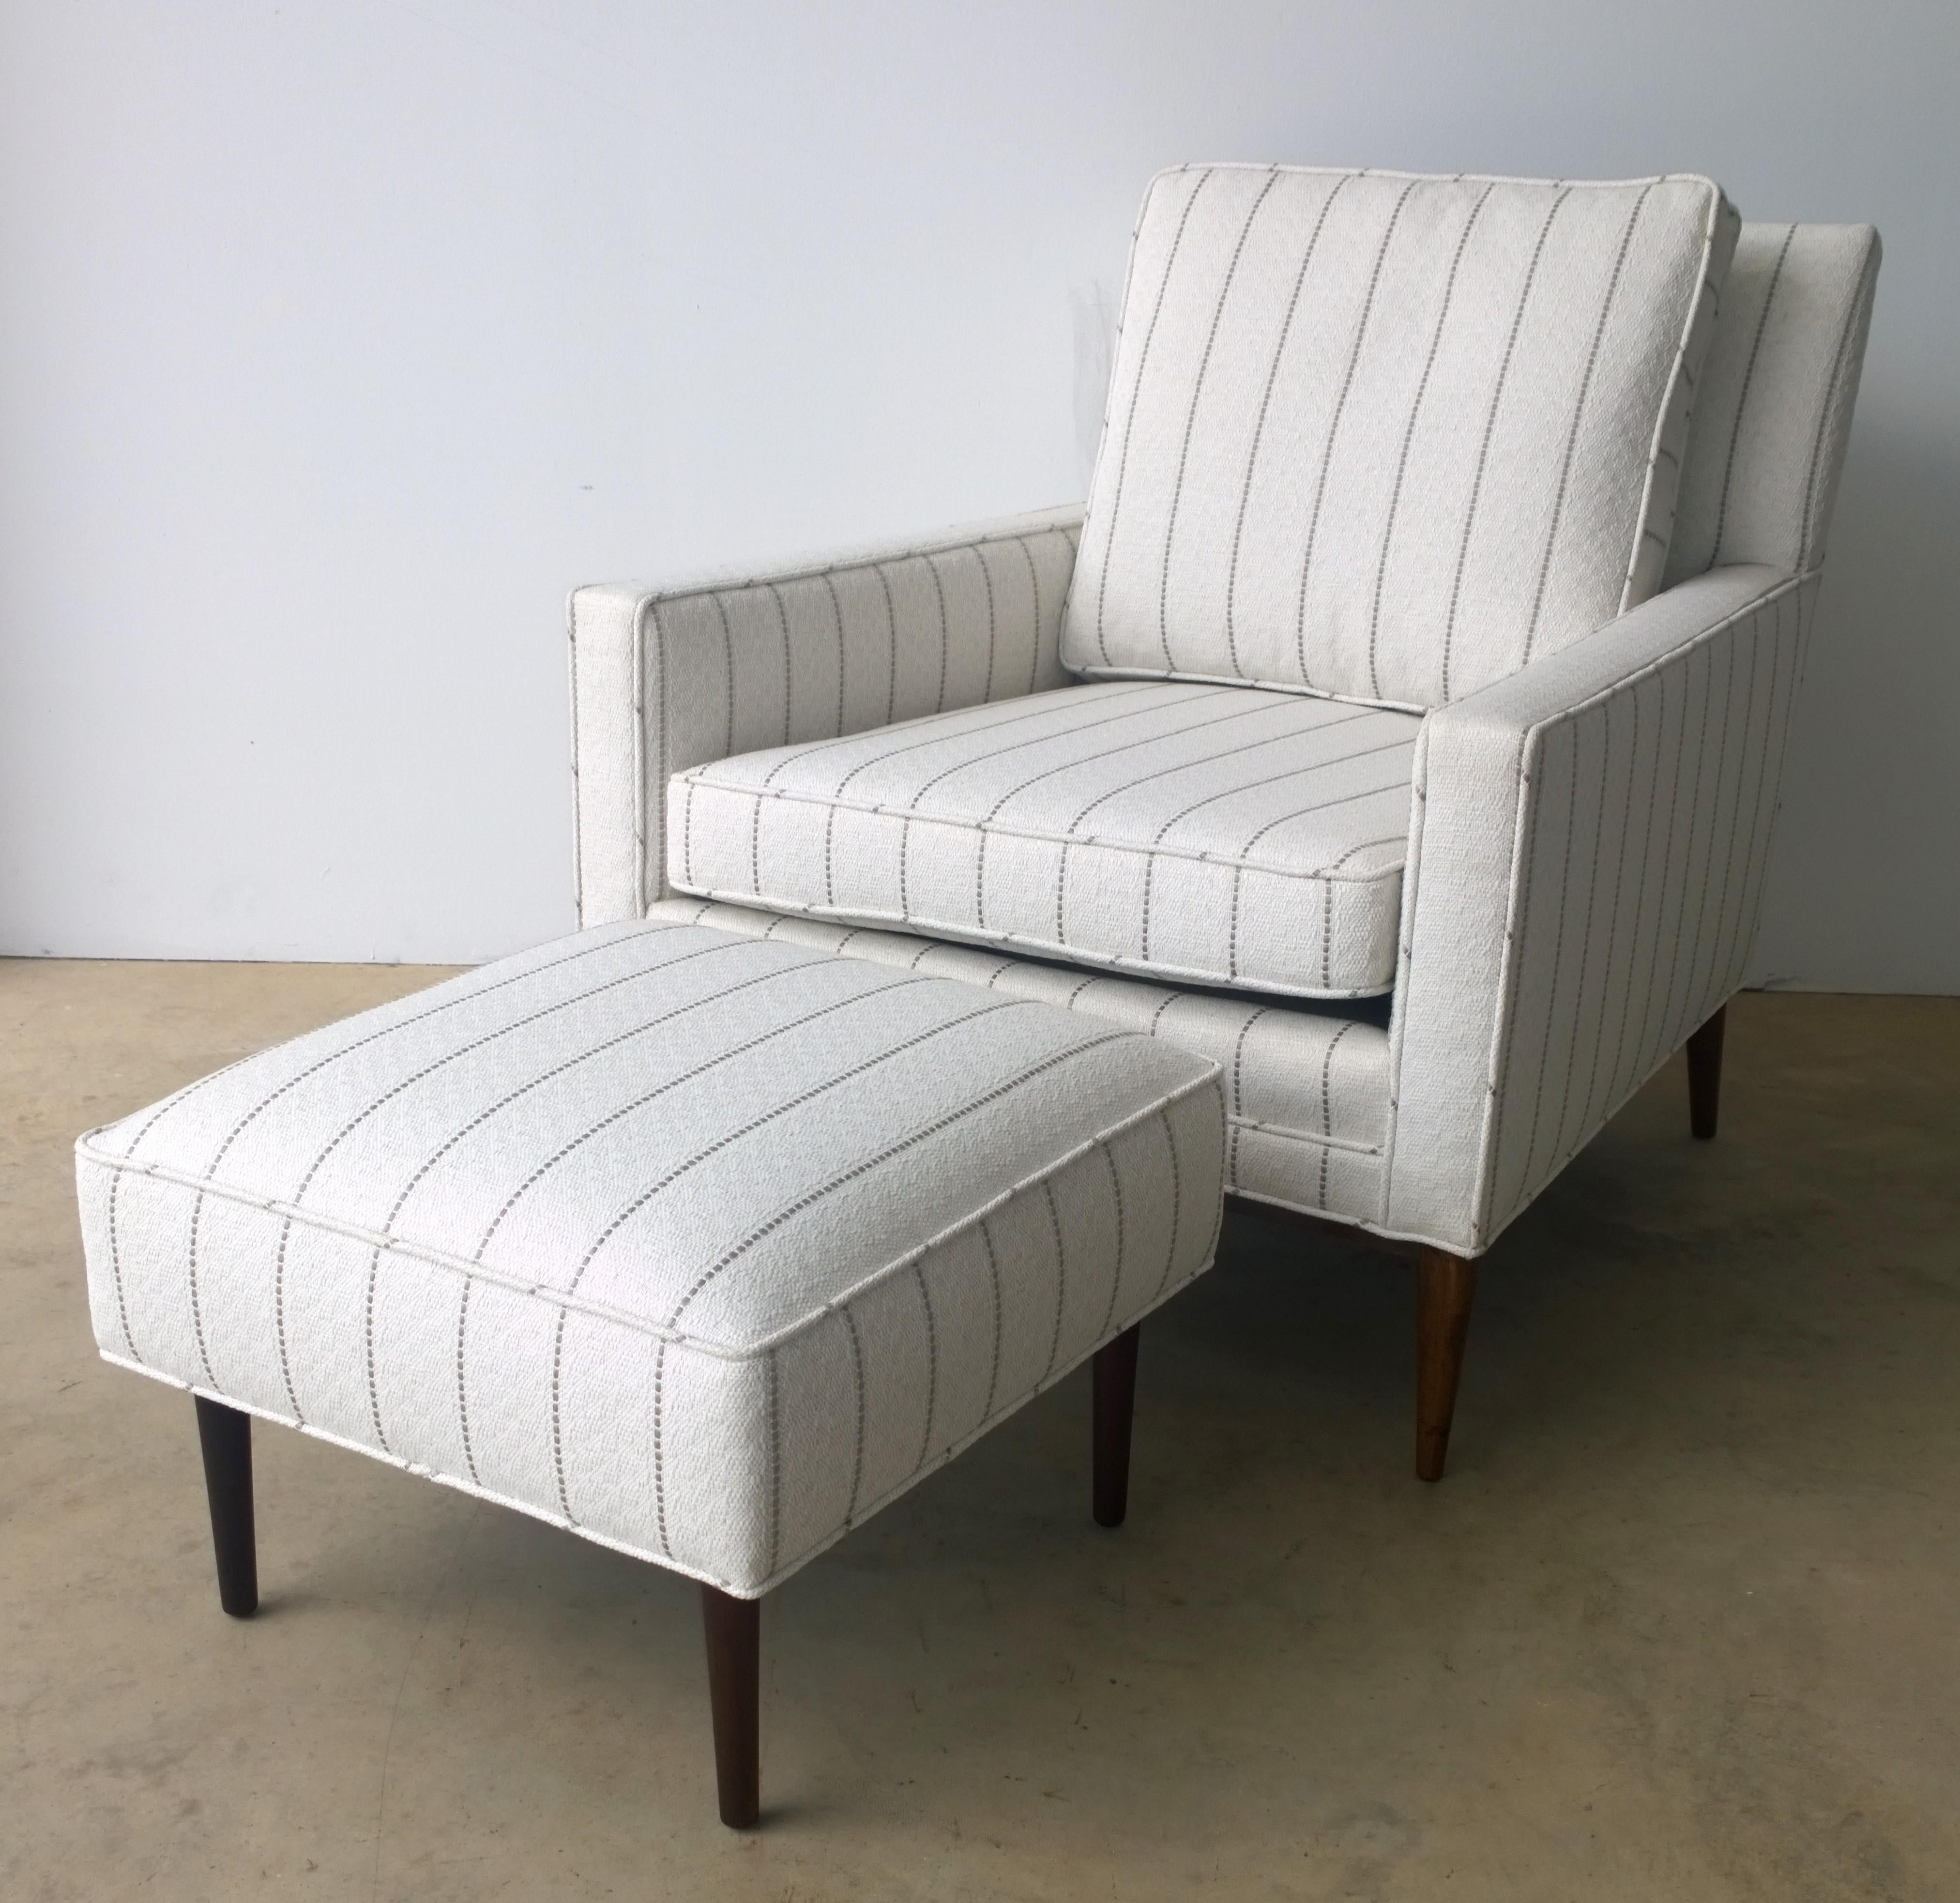 Offered is a Mid-Century Modern newly upholstered in white with a gray pin stripe Paul McCobb arm or lounge chair with Paul McCobb stool that was not originally sold with this chair. The chair is for sale and the stool is an extra newly upholstered